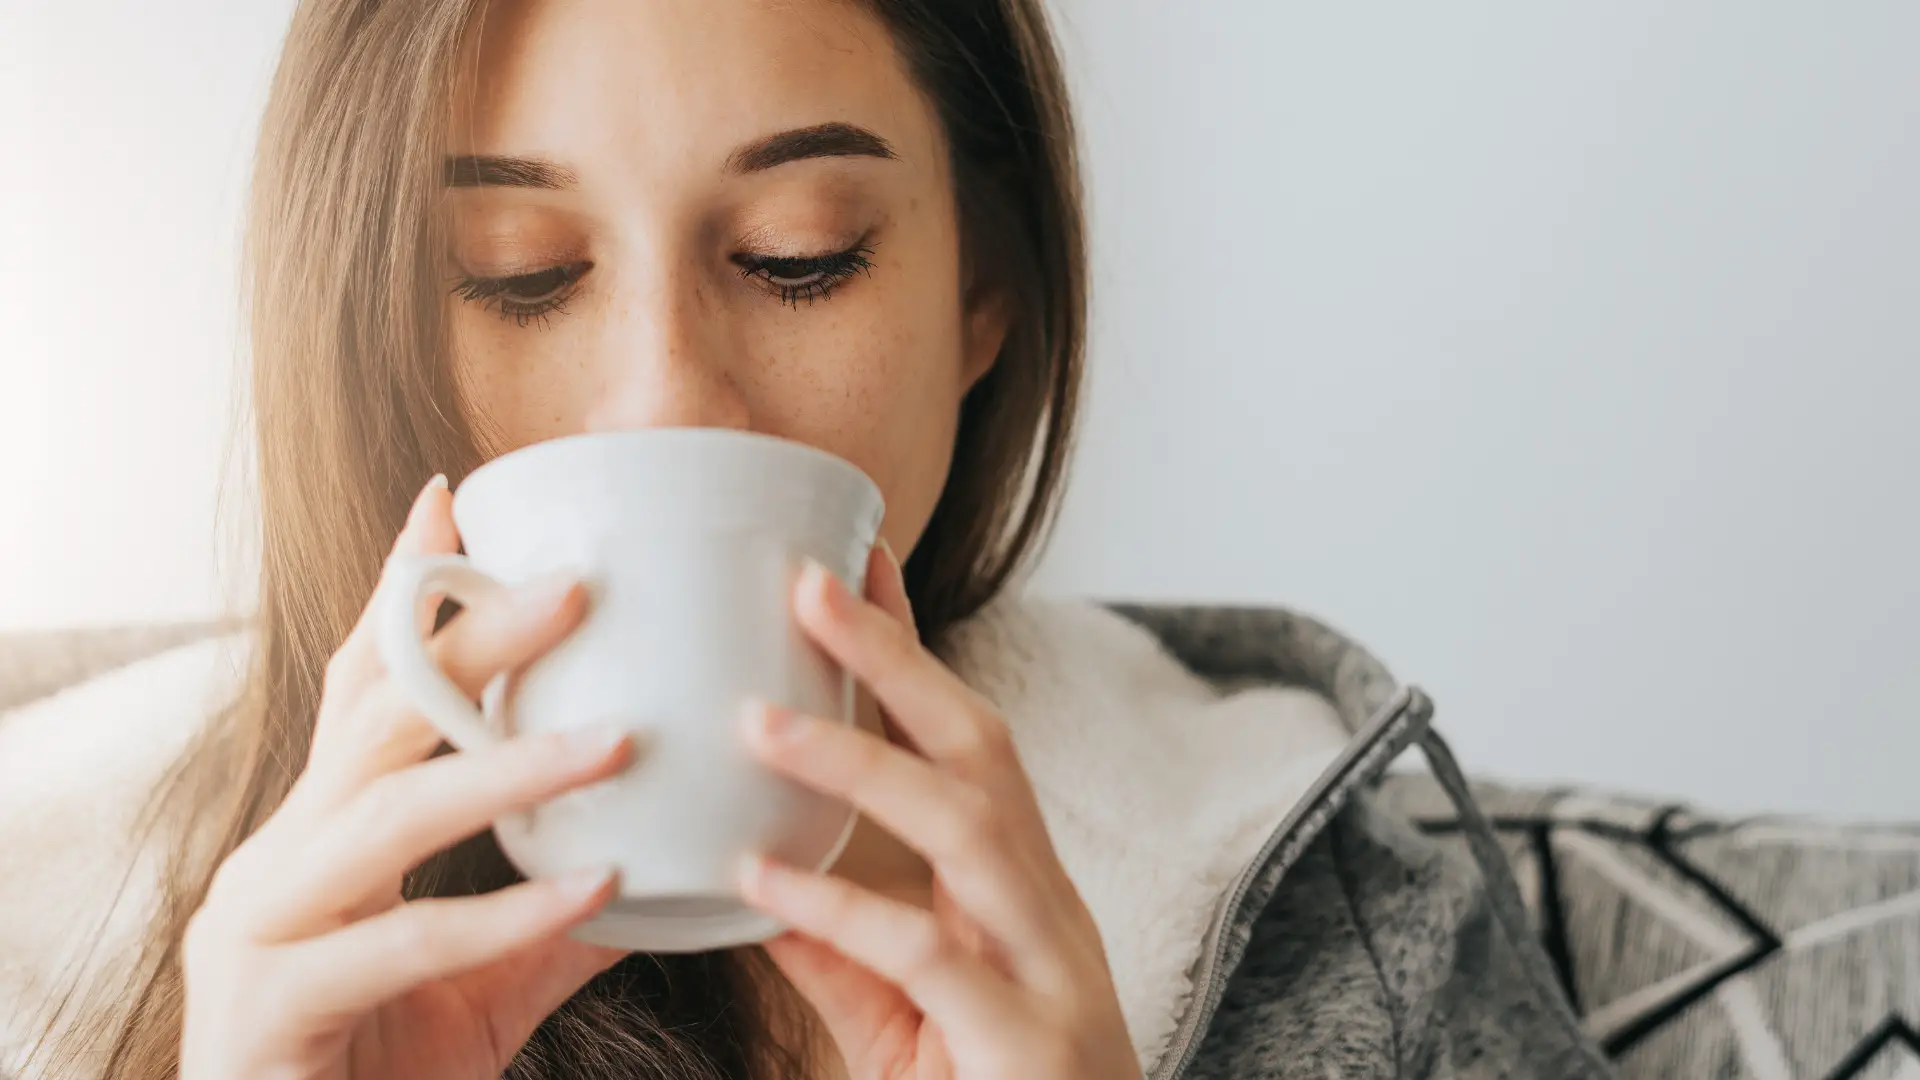 10 Low-Calorie Coffee Recipes for Fall: Sip Your Way to Cozy Comfort